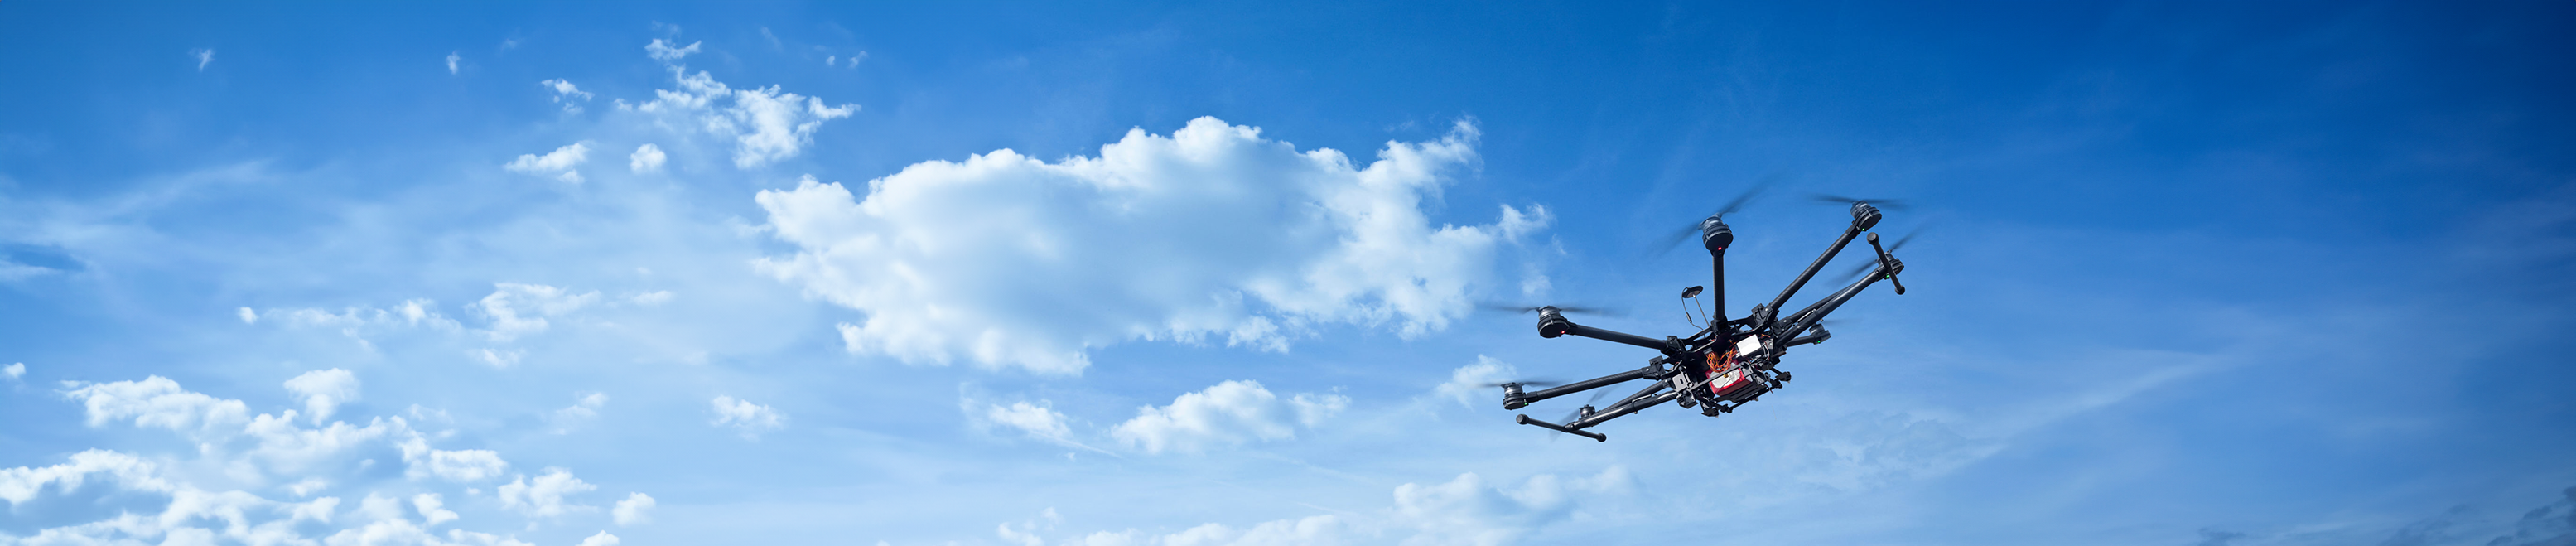  A drone flying in a clear blue sky with scattered clouds, showcasing advanced aerial technology and high-altitude capabilities.